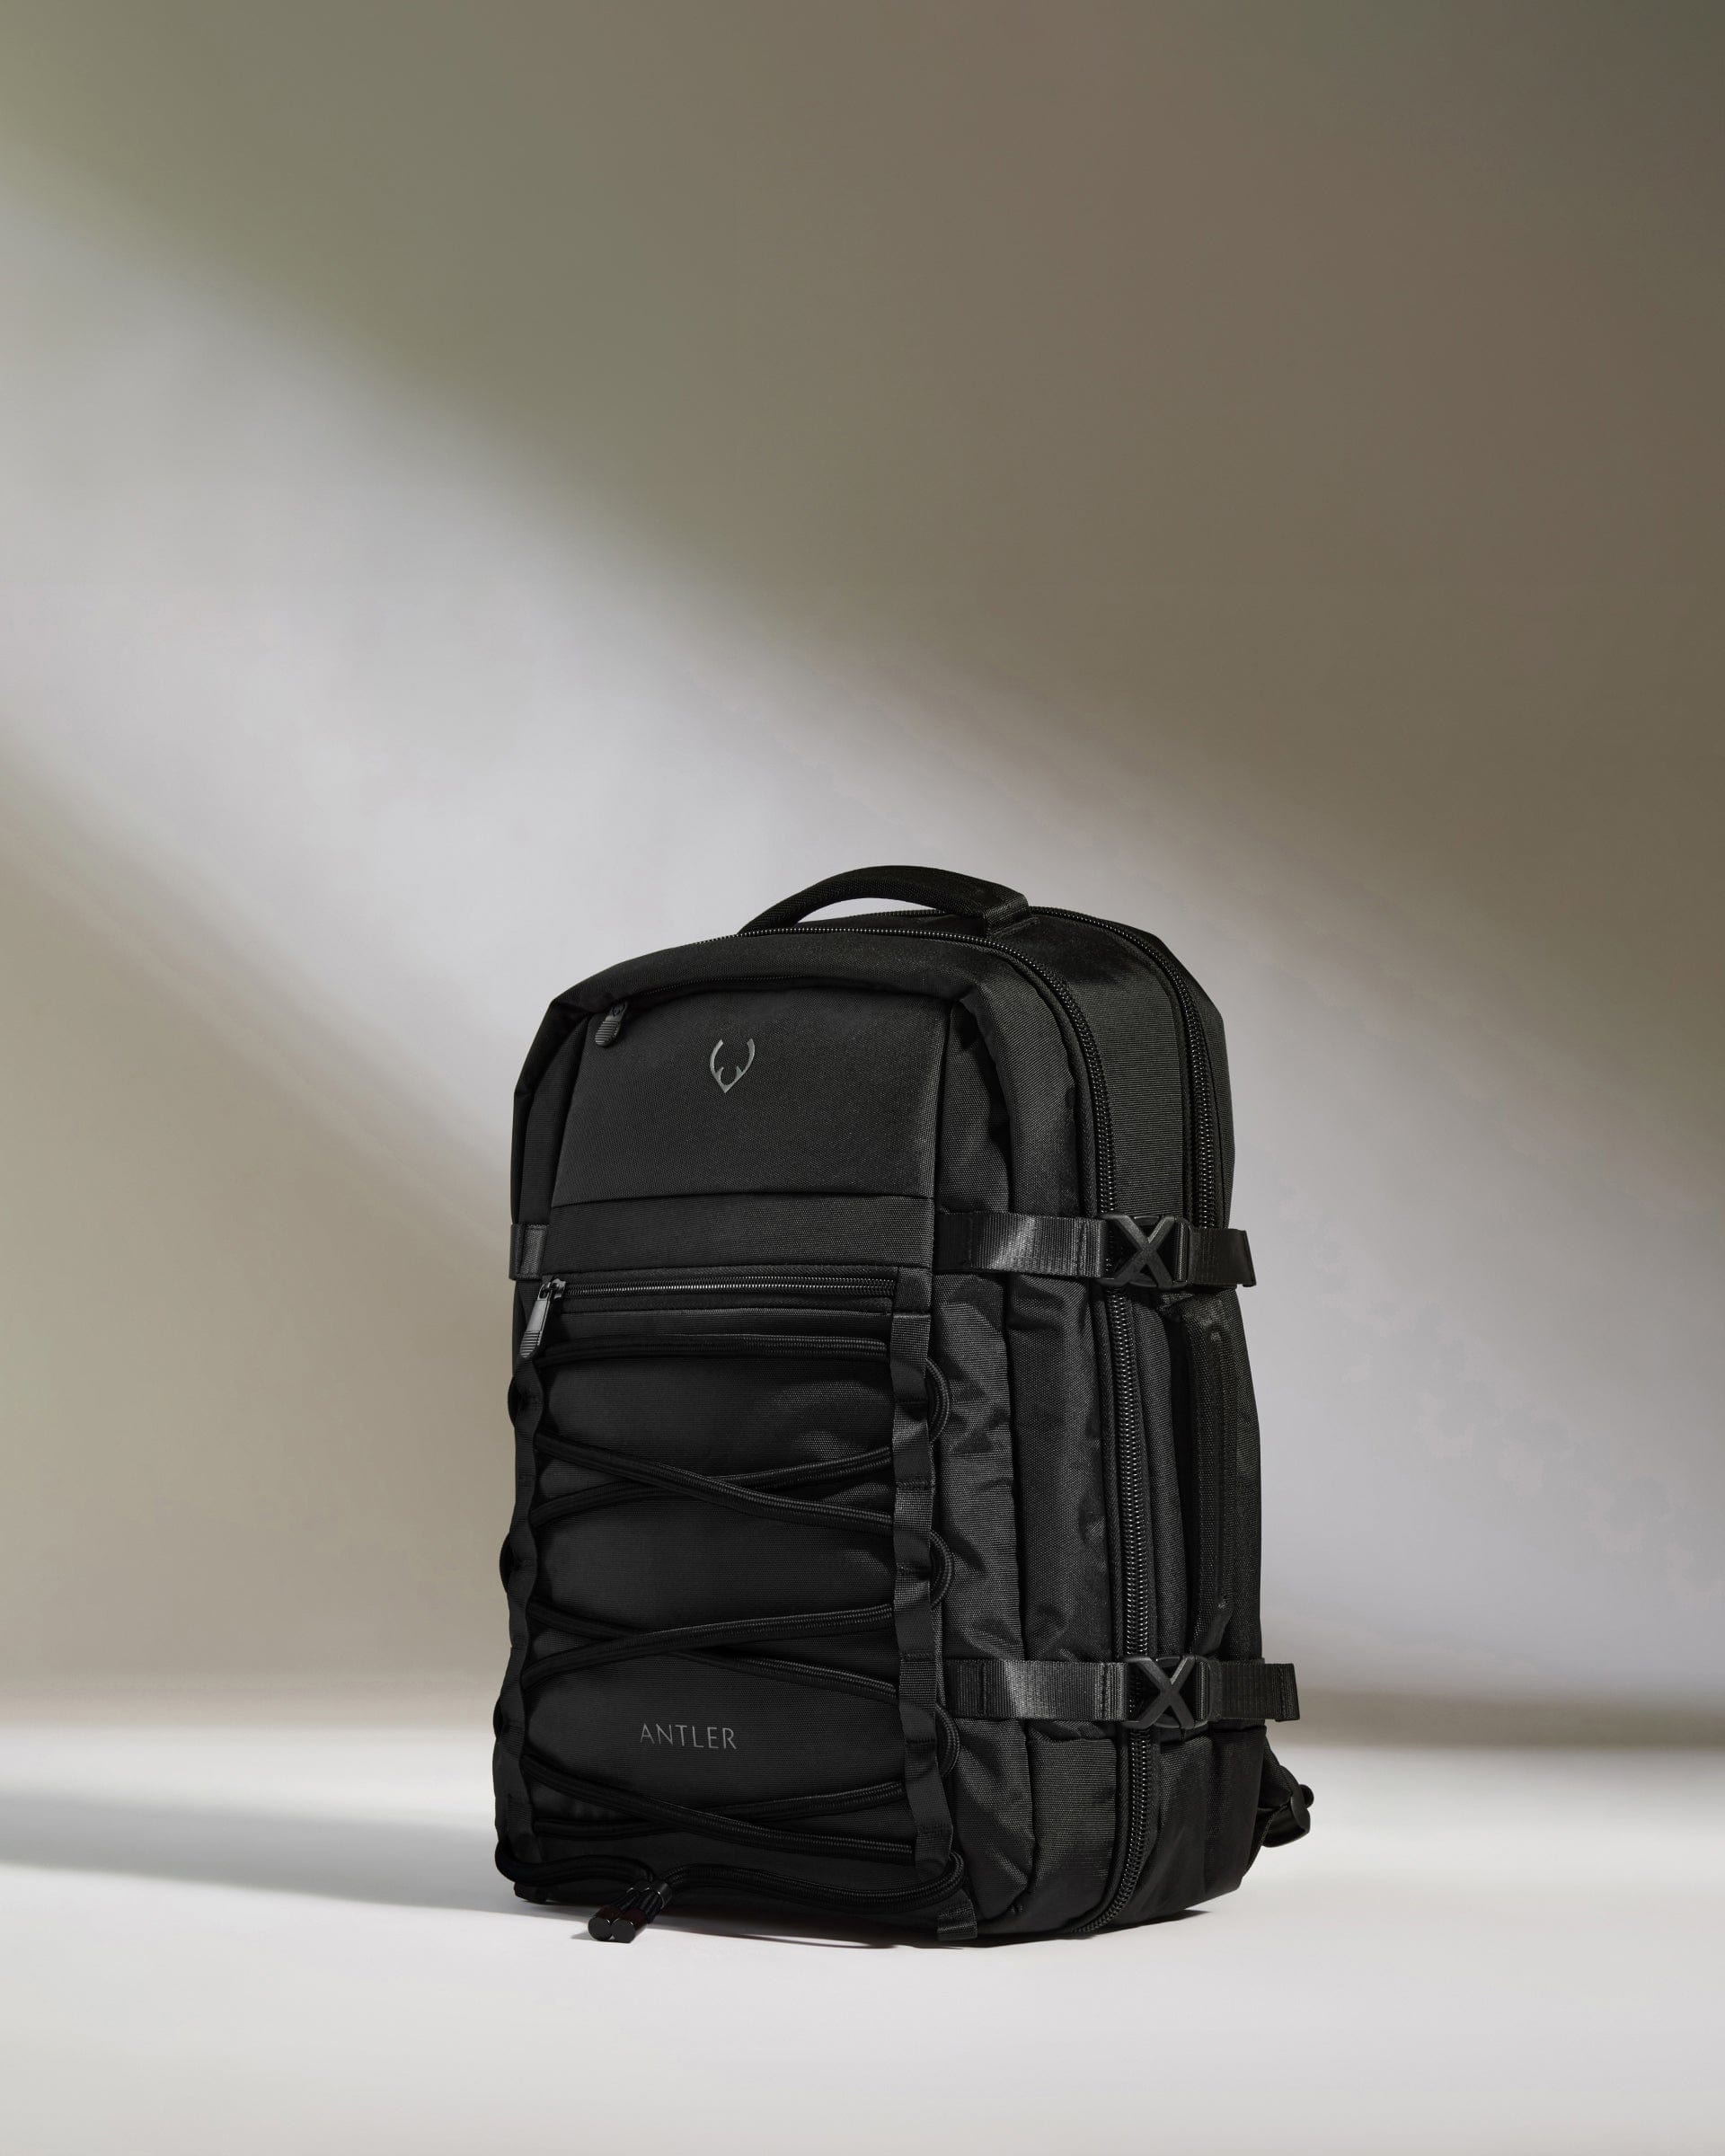 View Antler Discovery Backpack In Black Size 20cm x 45cm x 31cm information